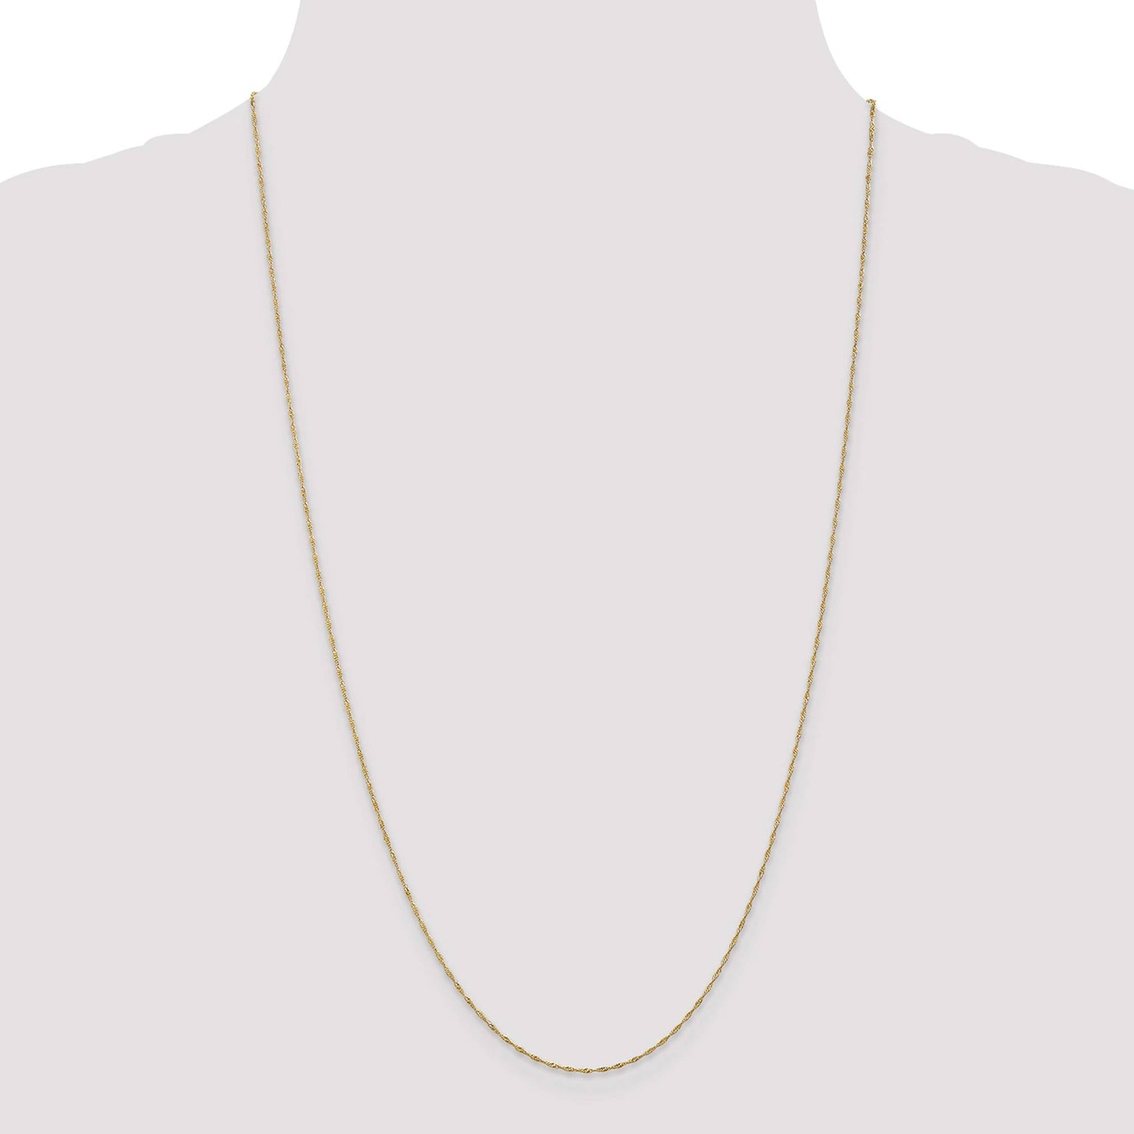 14K Yellow Gold 1.0mm Singapore Chain Necklace - Image 5 of 5